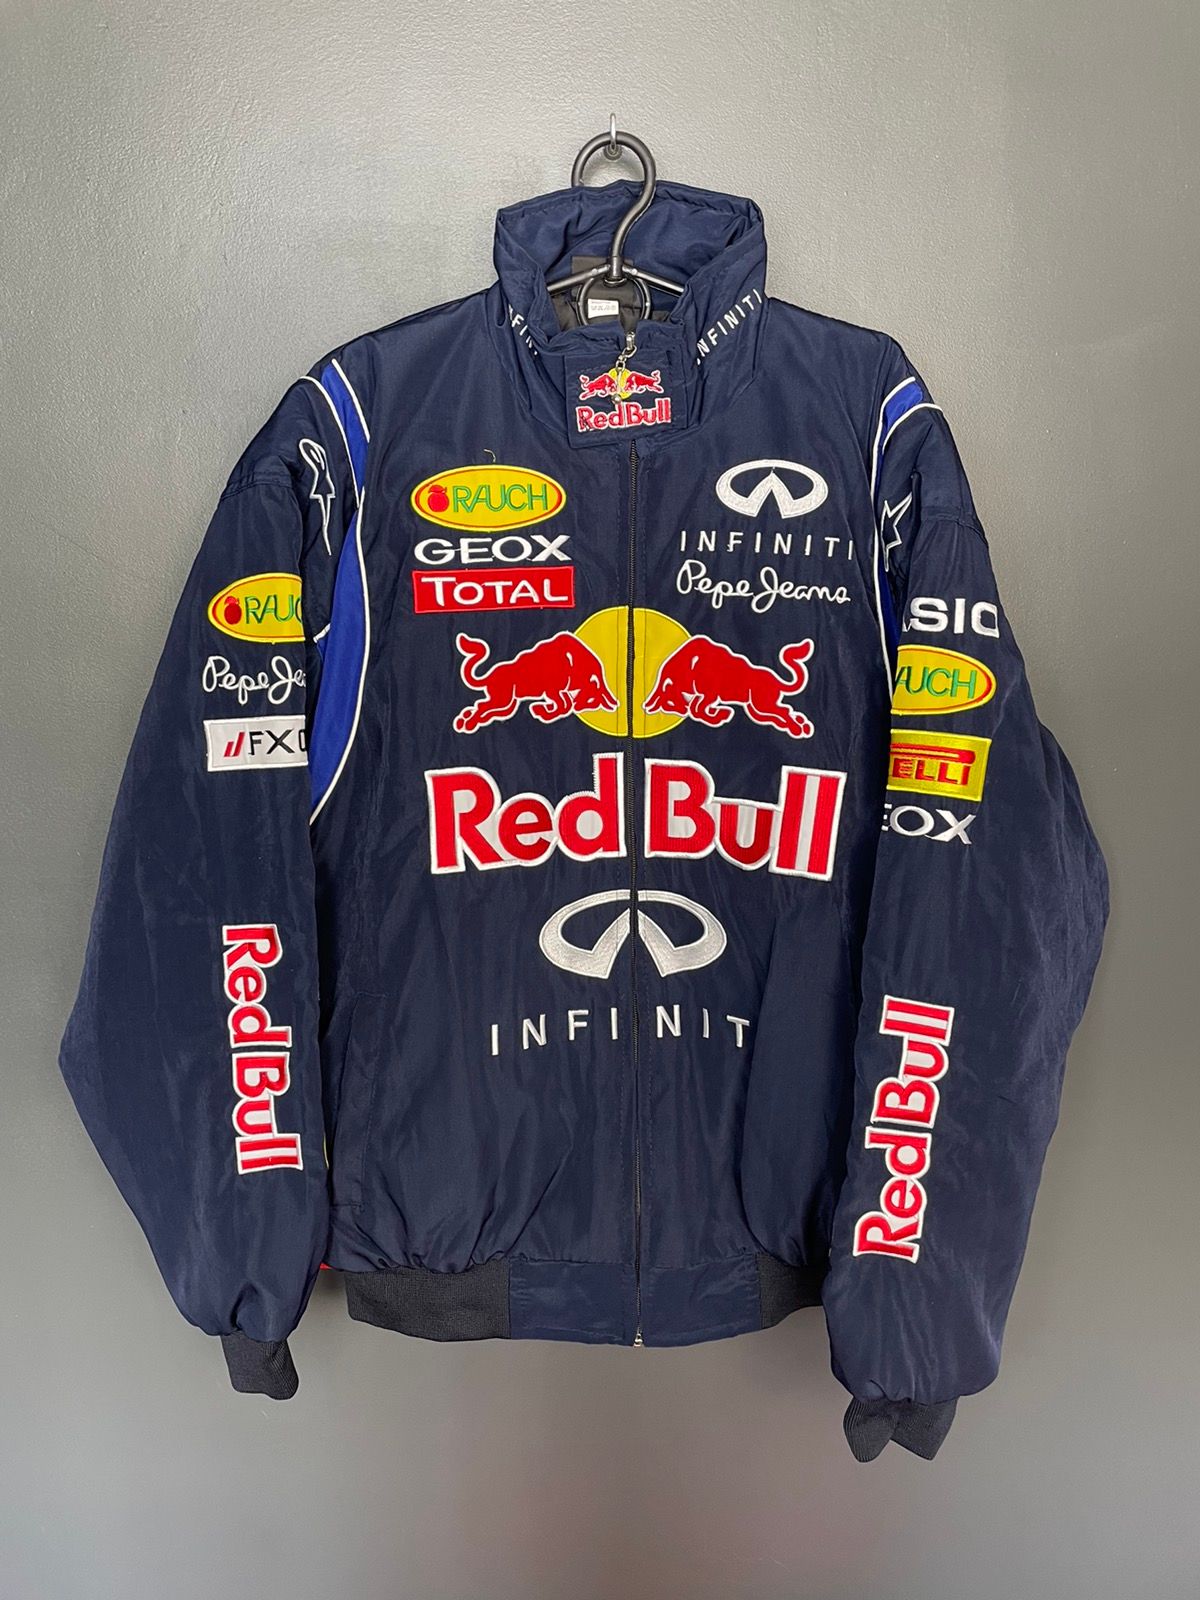 Pepe Jeans Pepe Jeans Red Bull F1 Racing Jacket | Grailed